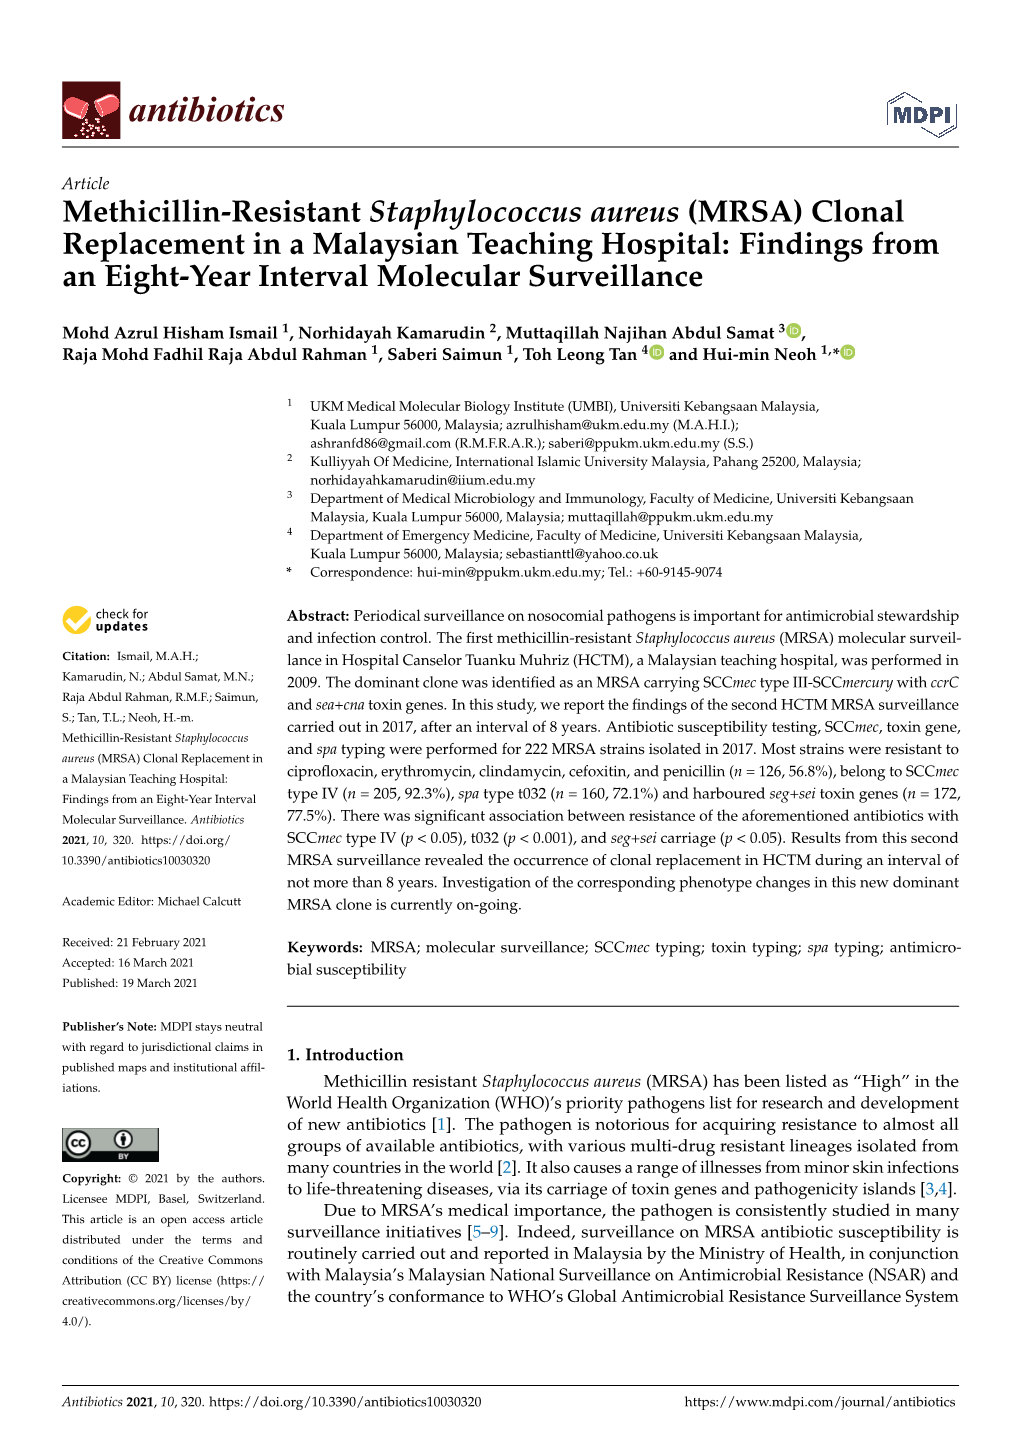 Methicillin-Resistant Staphylococcus Aureus (MRSA) Clonal Replacement in a Malaysian Teaching Hospital: Findings from an Eight-Year Interval Molecular Surveillance